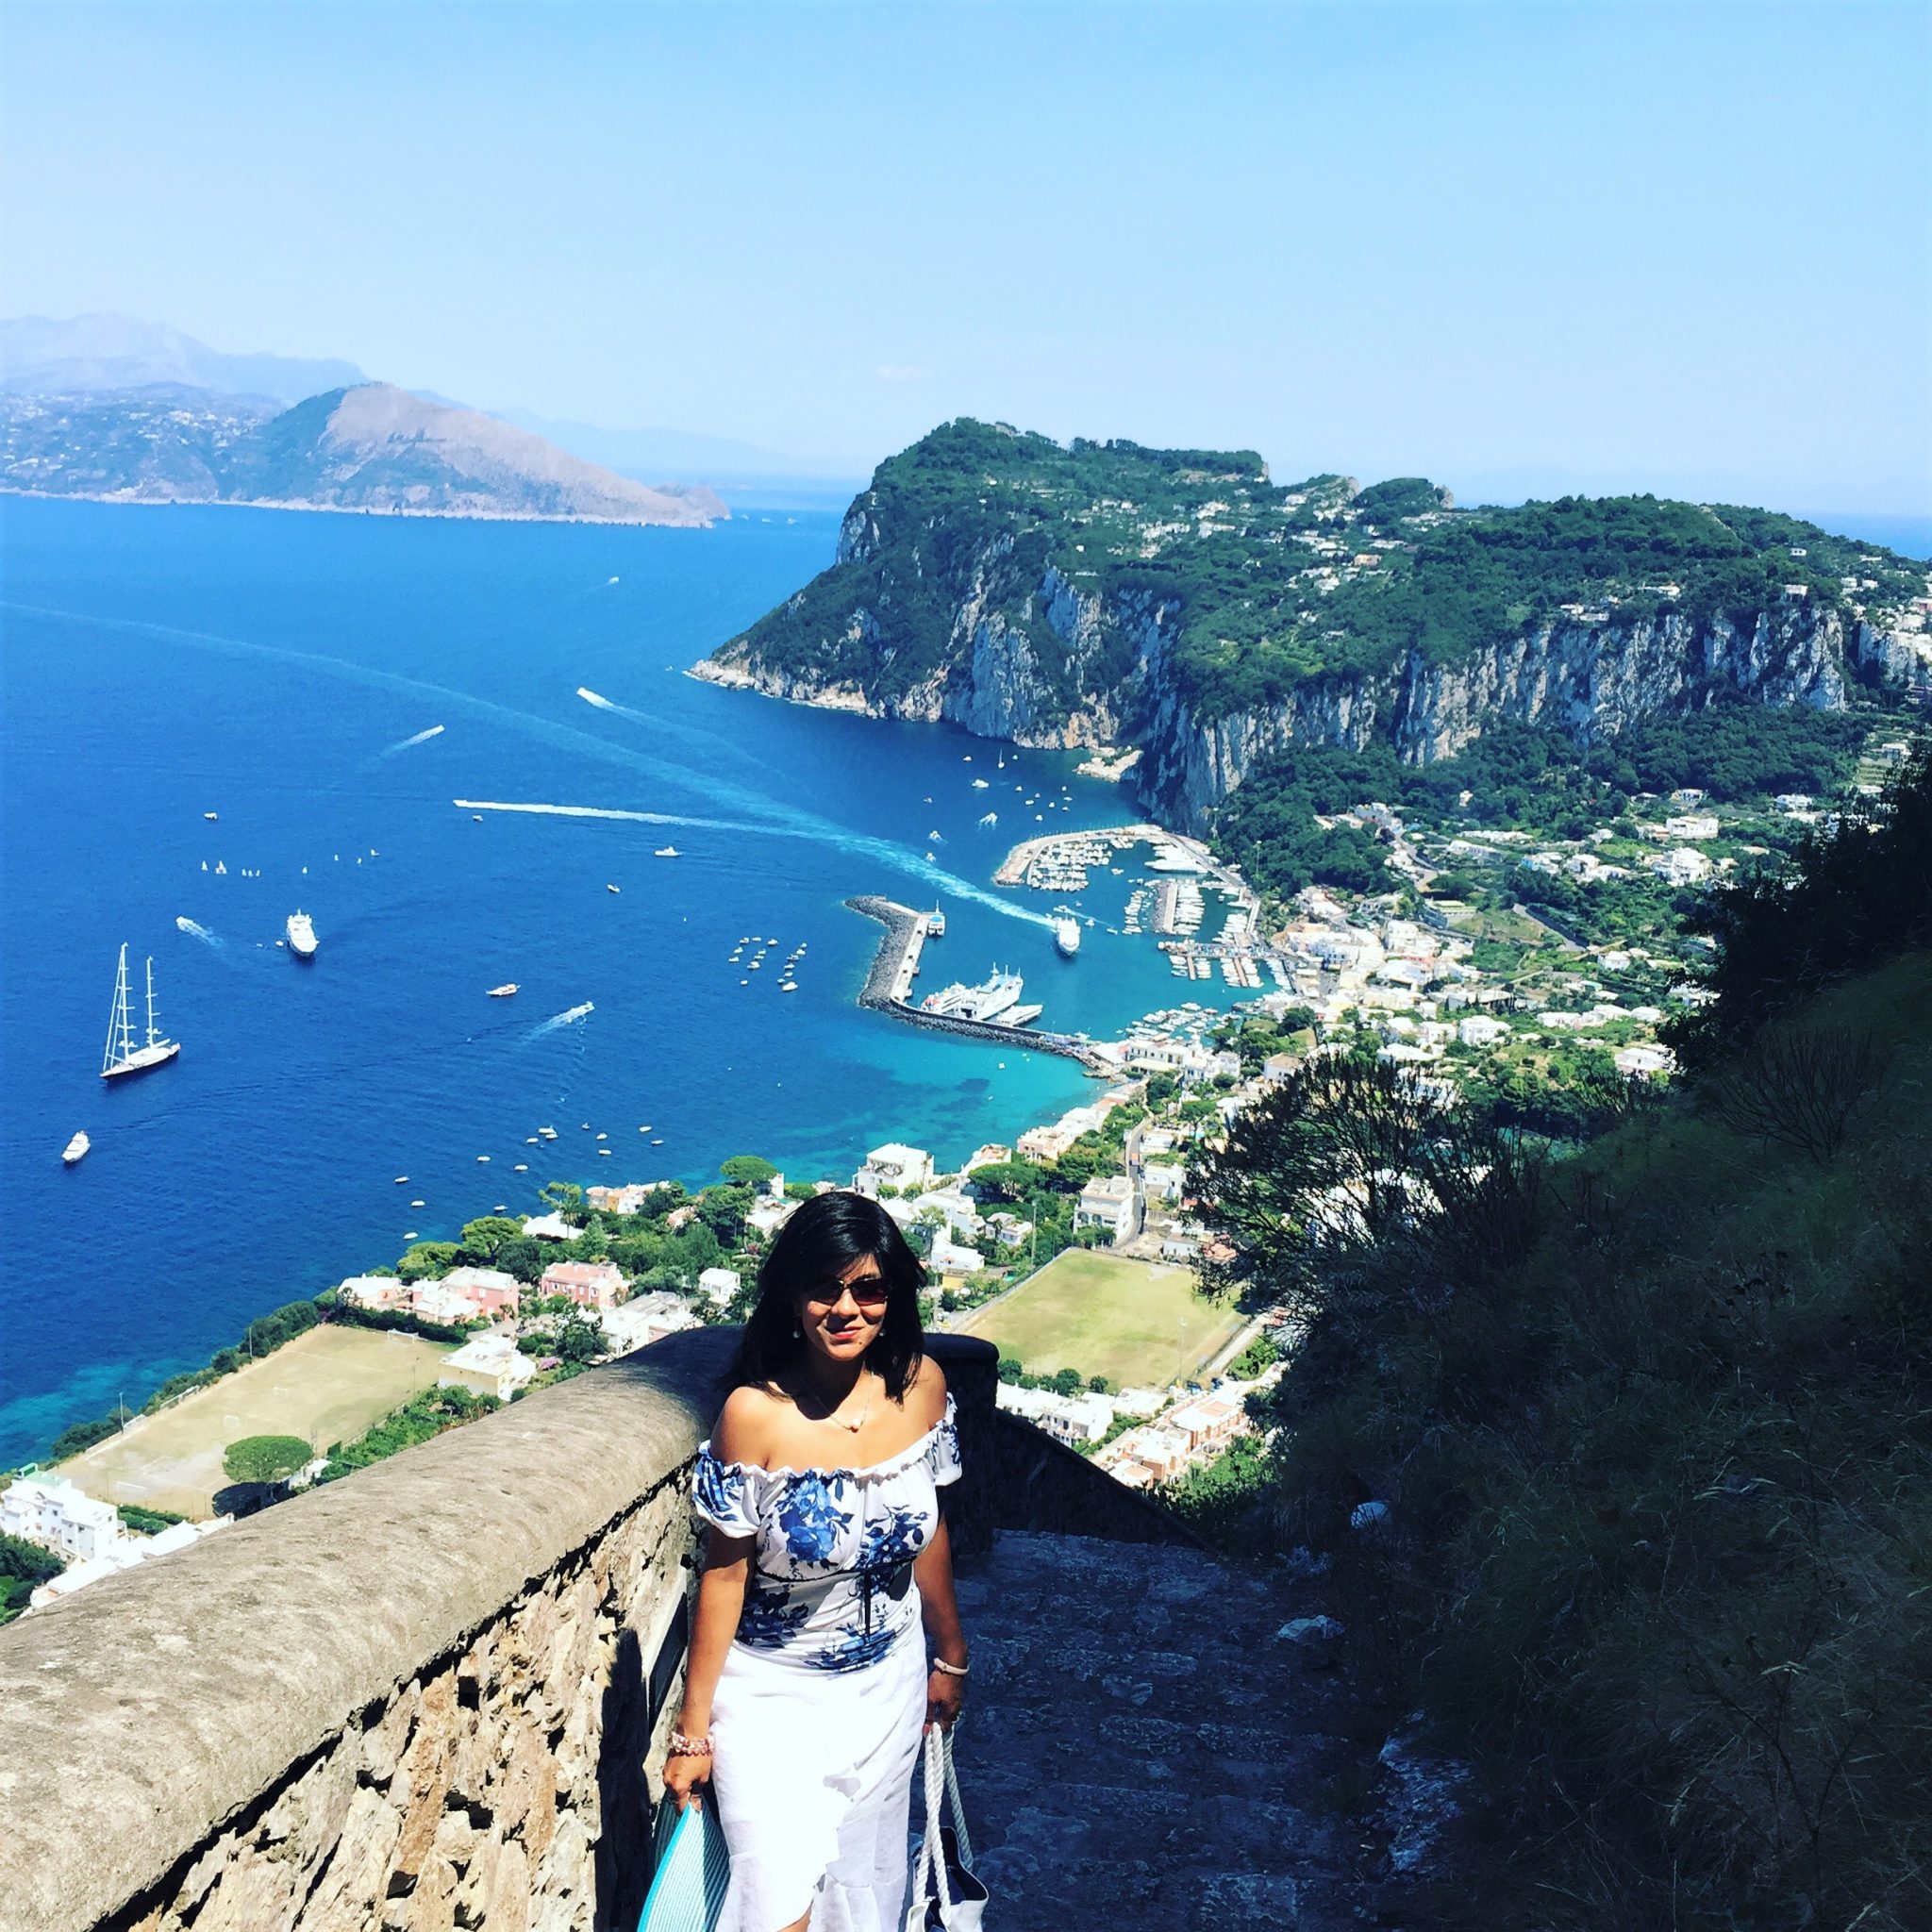 Visiting Capri, Italy : The breathtaking view from the Phoenician Steps